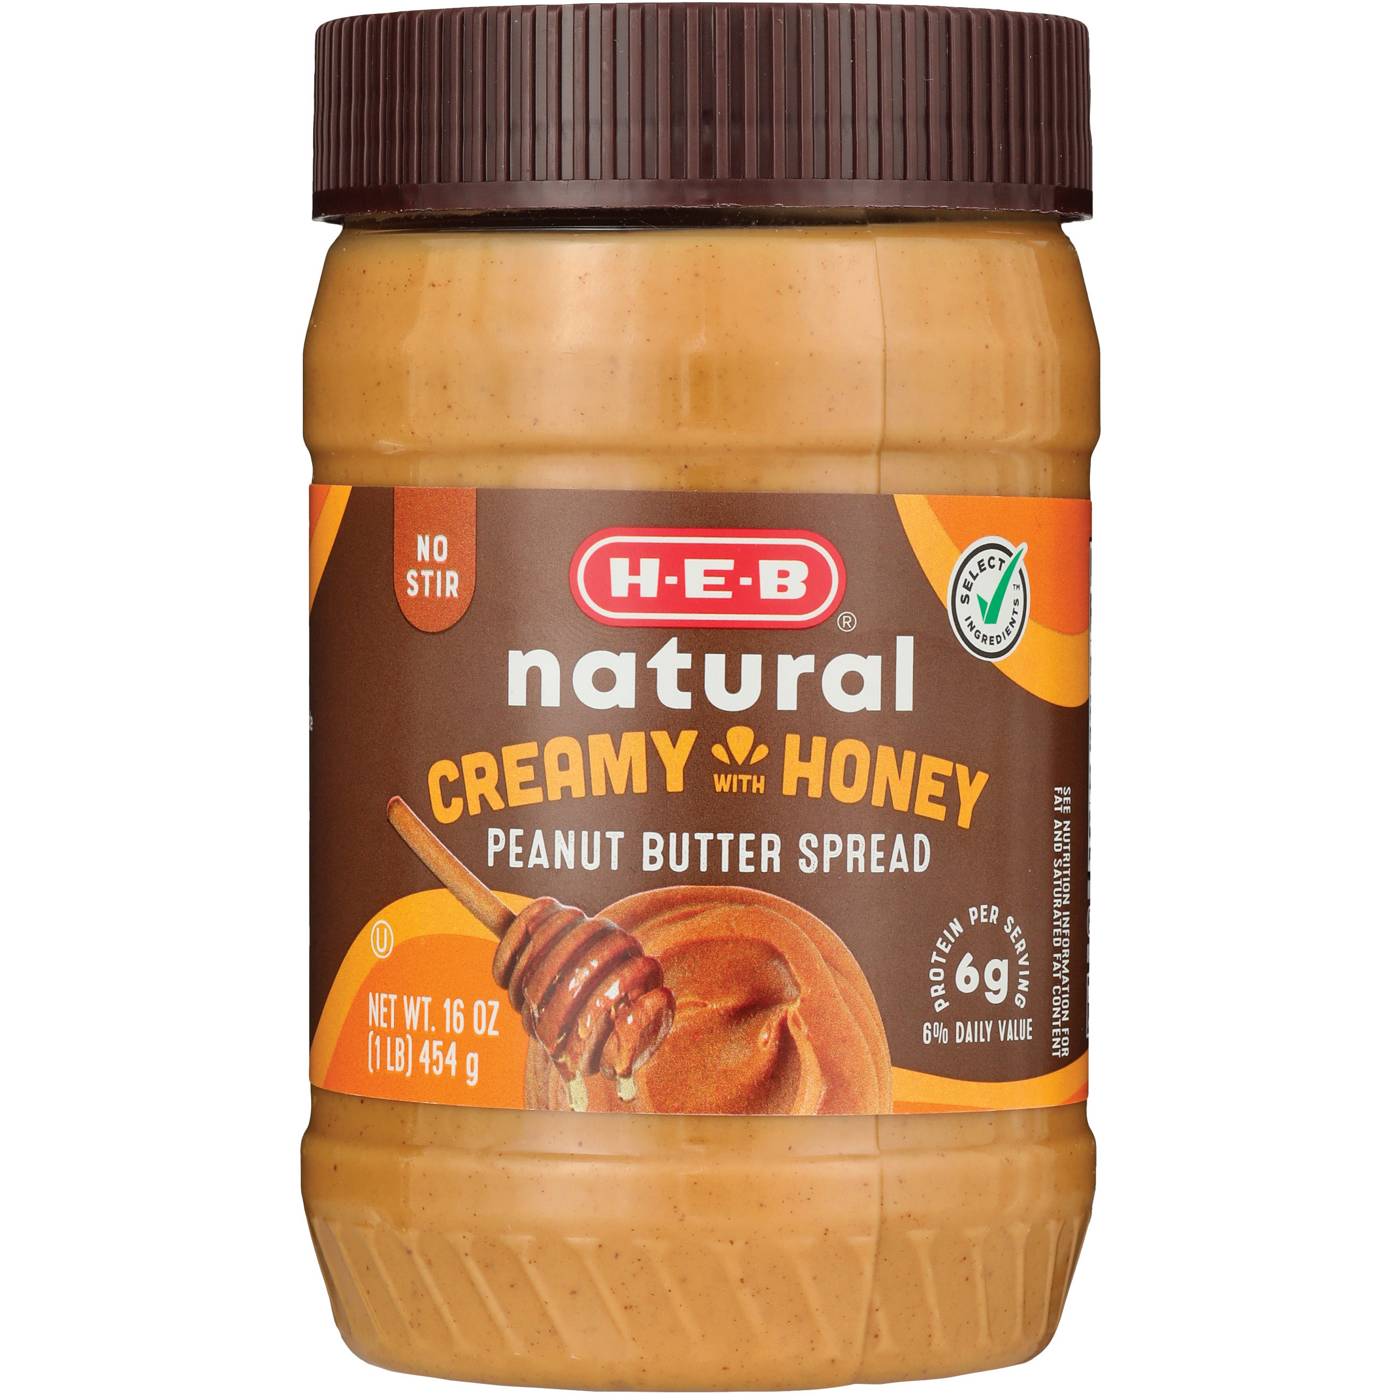 H-E-B Natural 6g Protein Creamy Peanut Butter - Honey; image 1 of 2